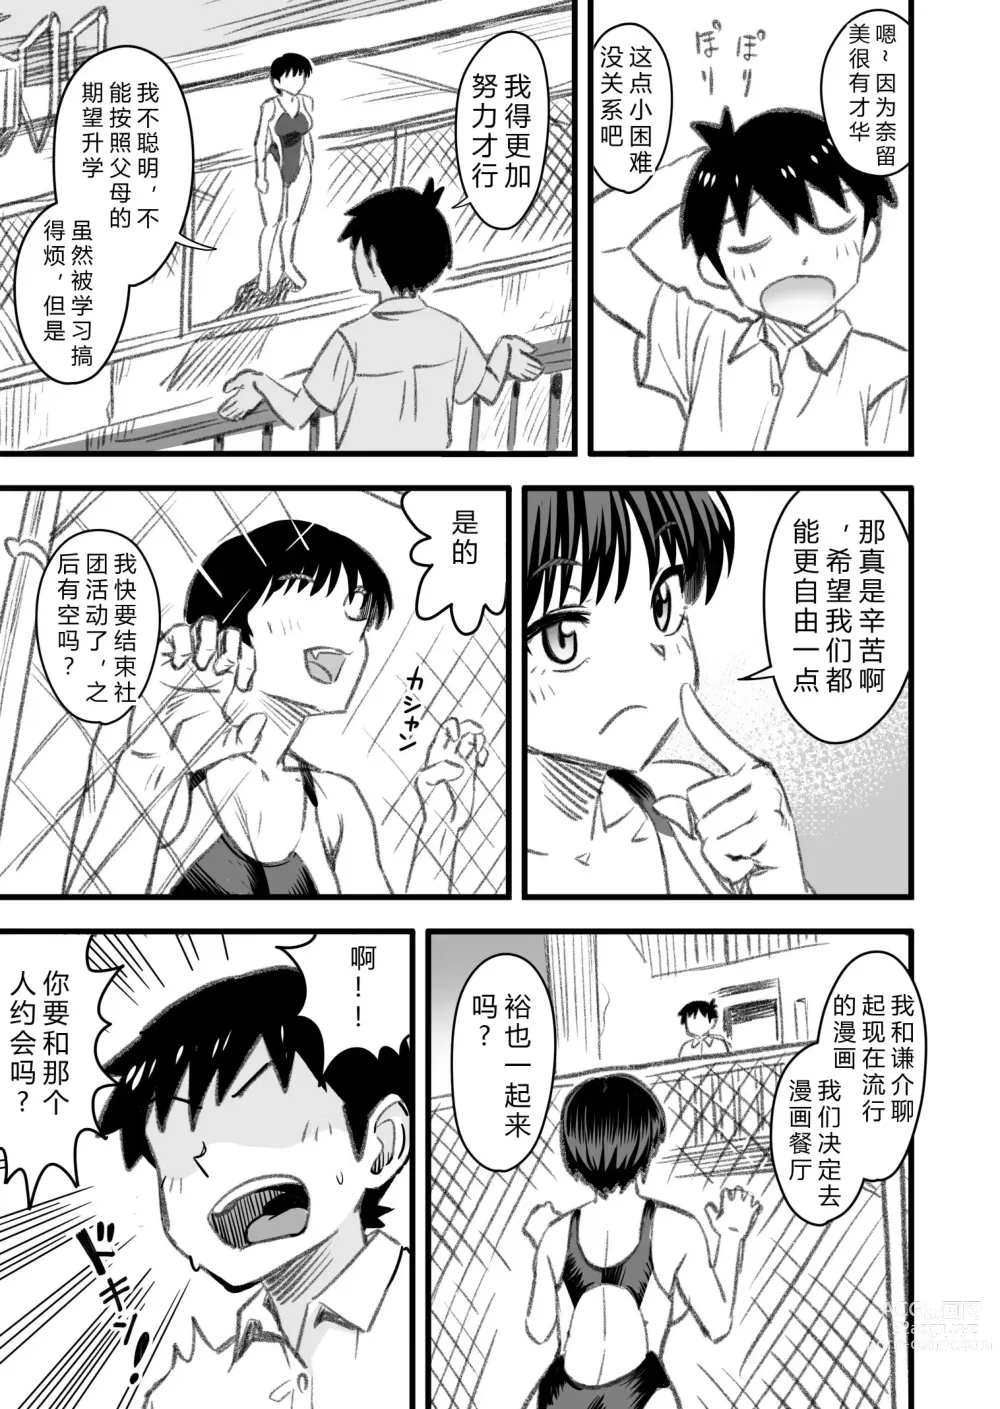 Page 17 of doujinshi How will the Protagonist's Brain be destroyed?